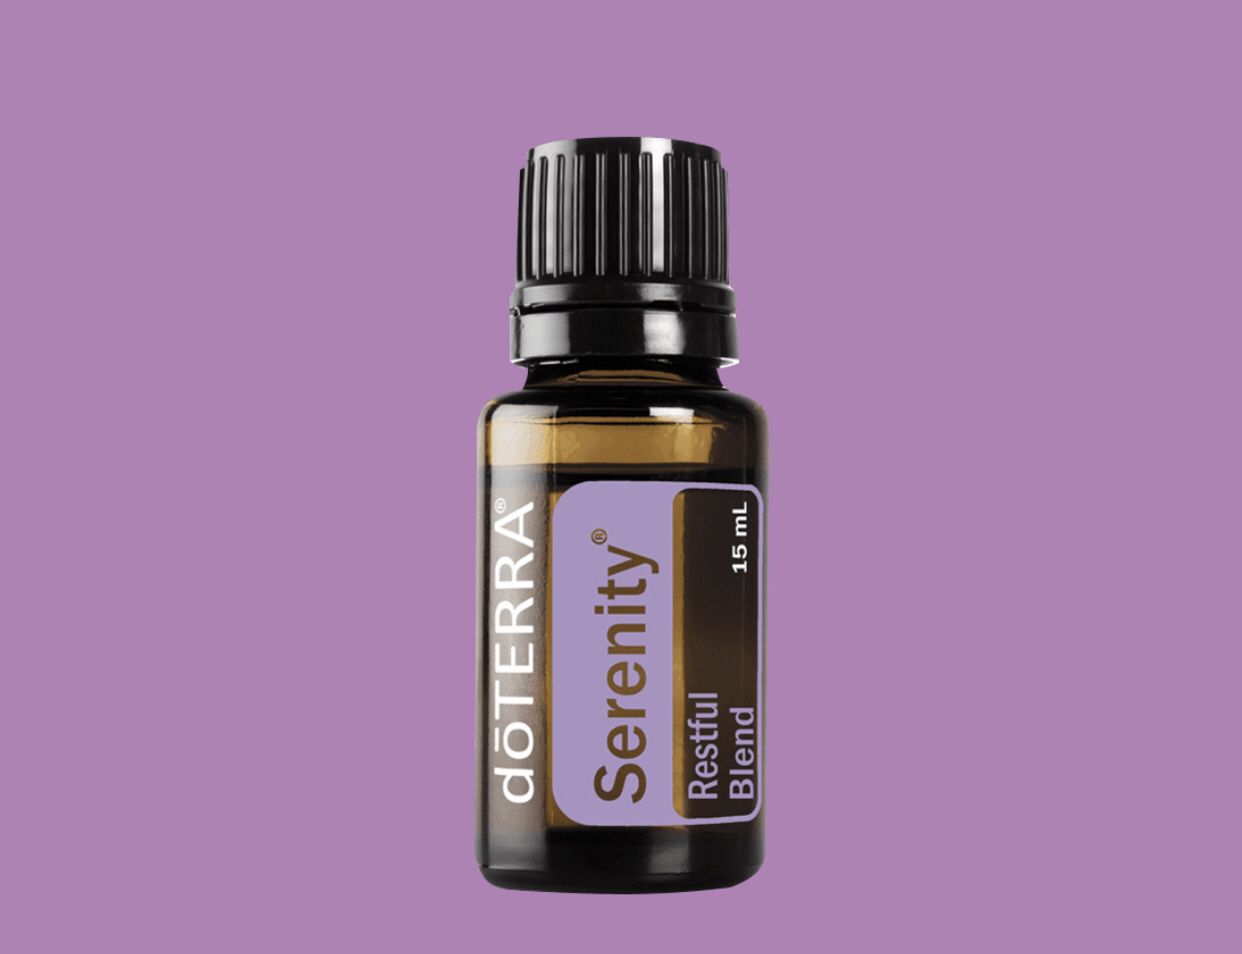 Serenity doTerra Essential Oil 15ml Aceite Esencial Reduce Stress Sleep Better And Relax 